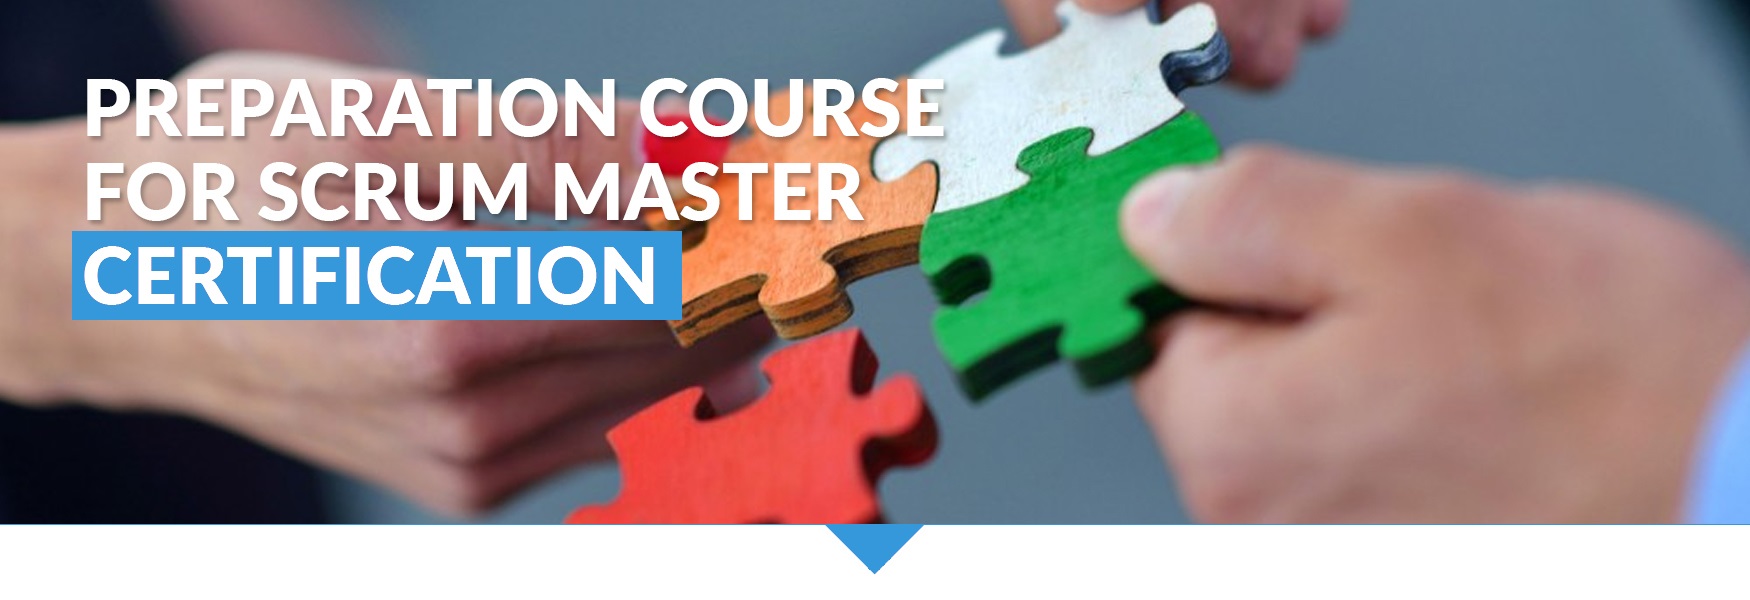 Preparation Course for Scrum Master Certification (CB, 2021)